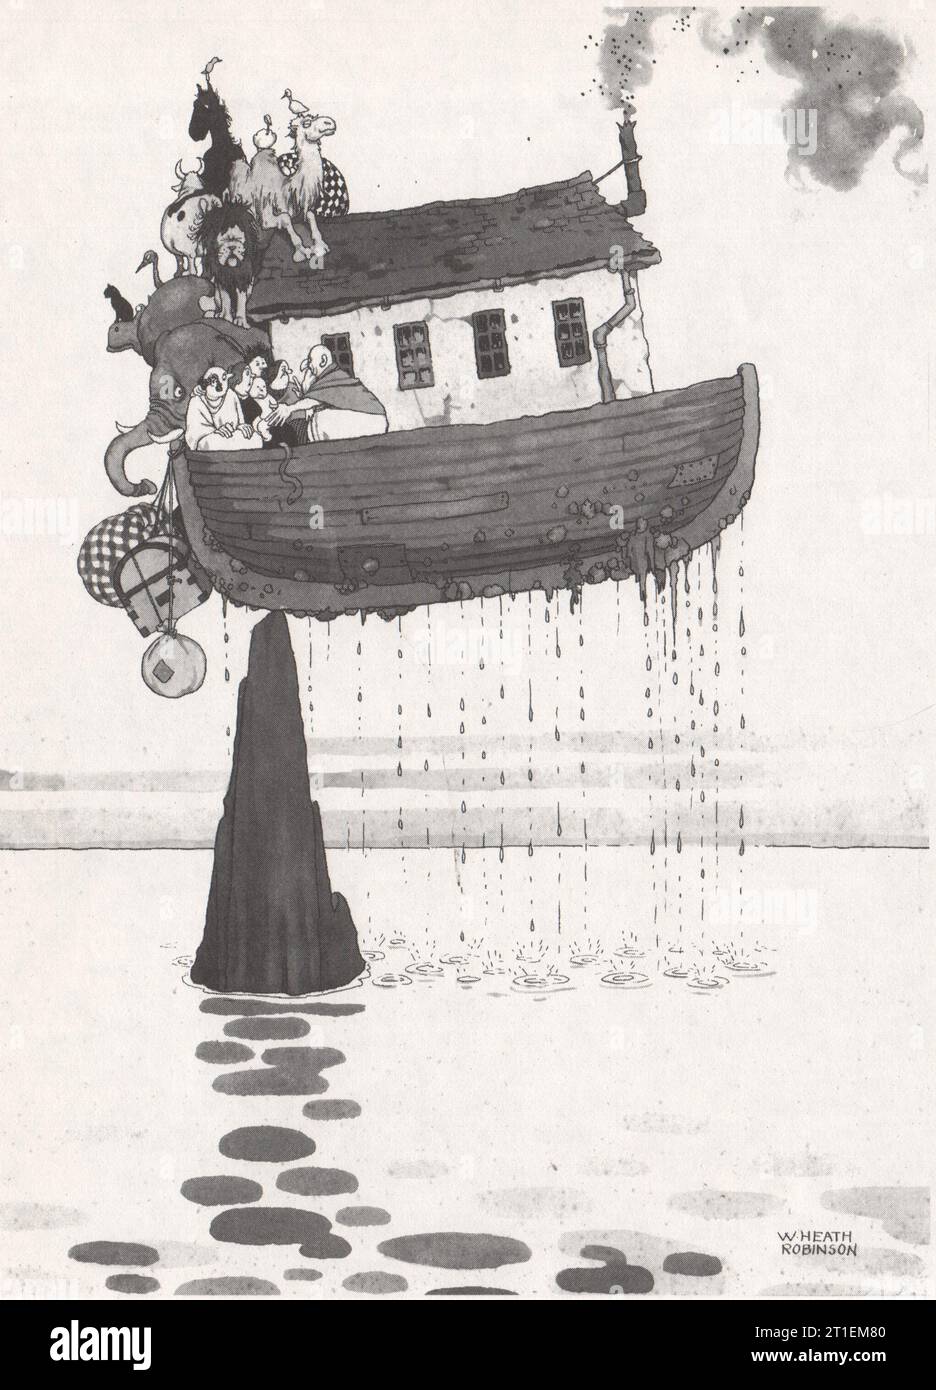 HEATH ROBINSON. Noah and the flood 1973 old vintage print picture Stock Photo